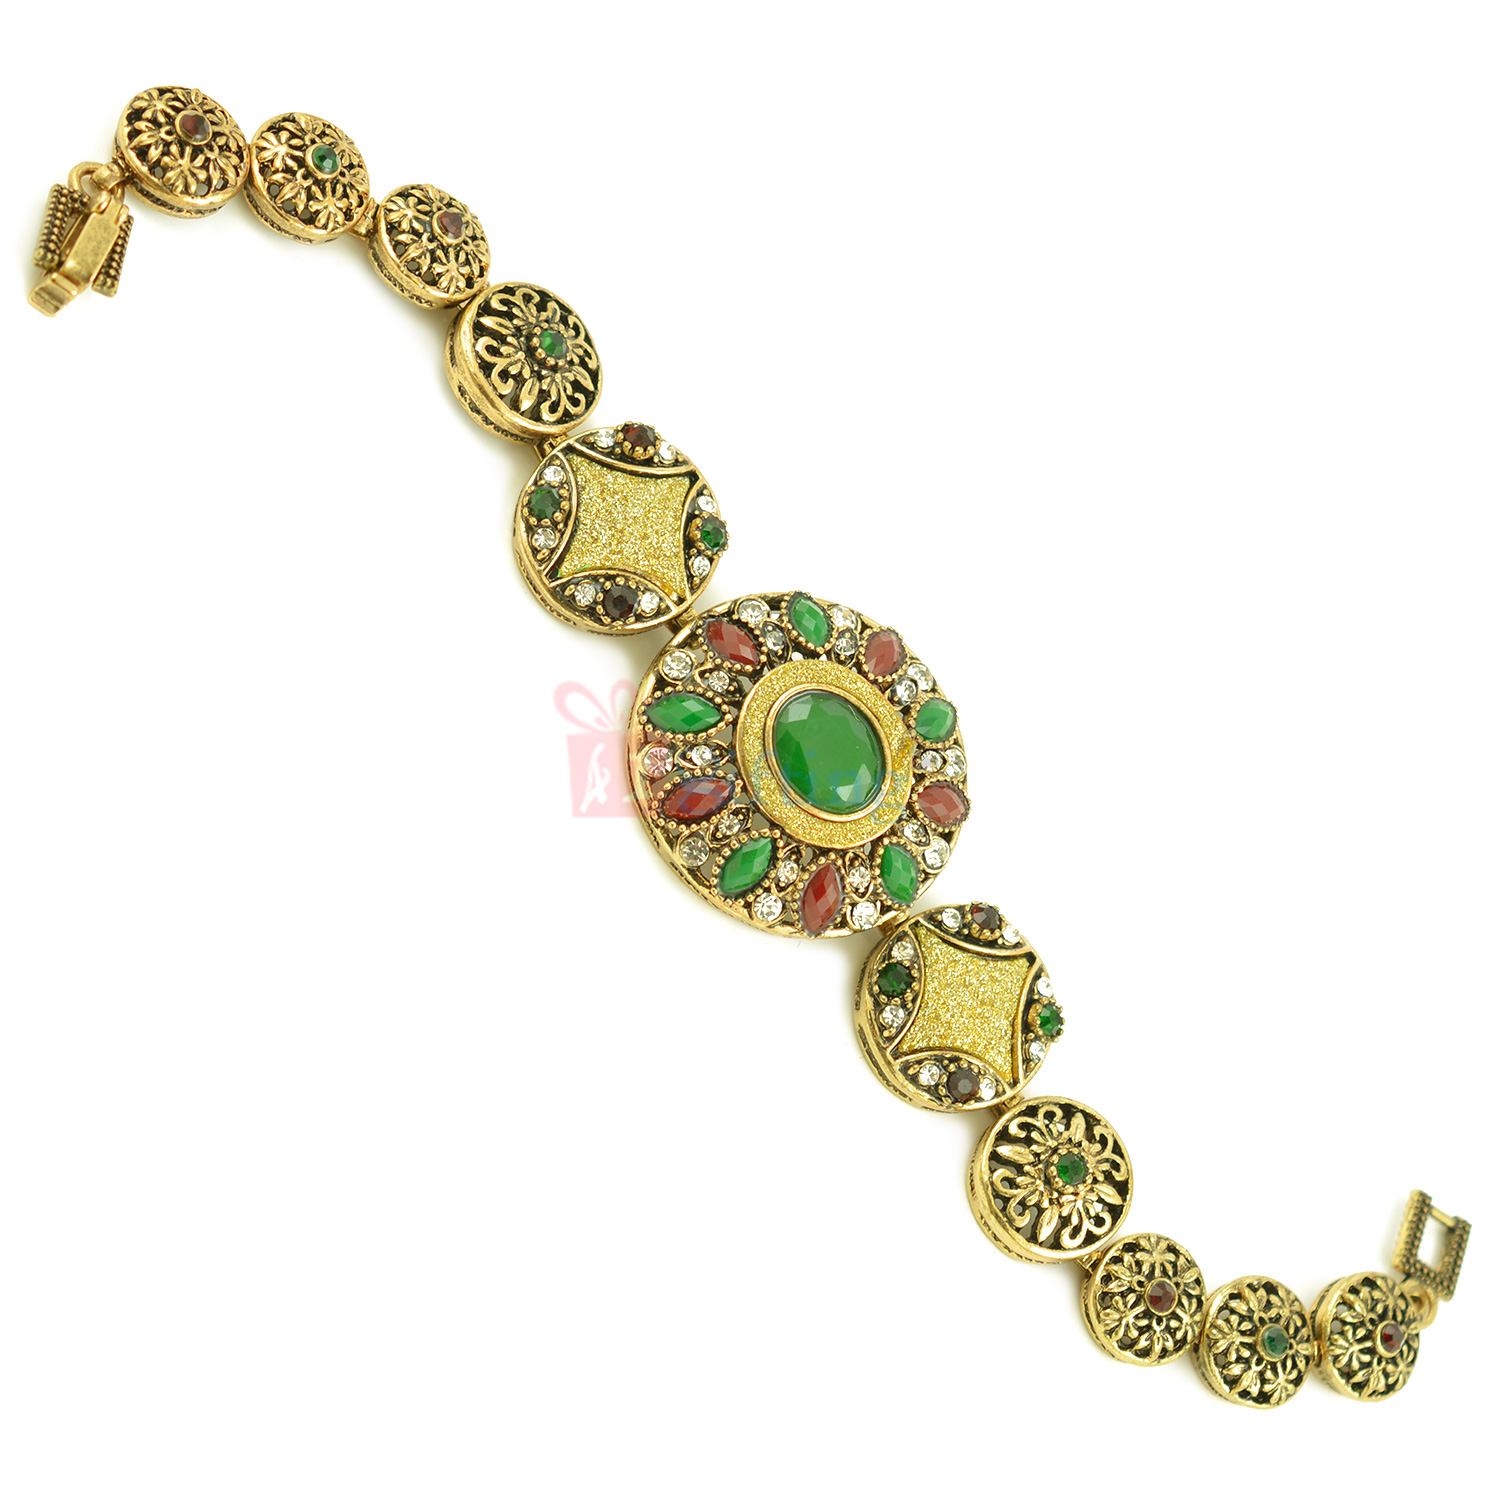 Great Looking Awesome and Antique Golden Bracelet